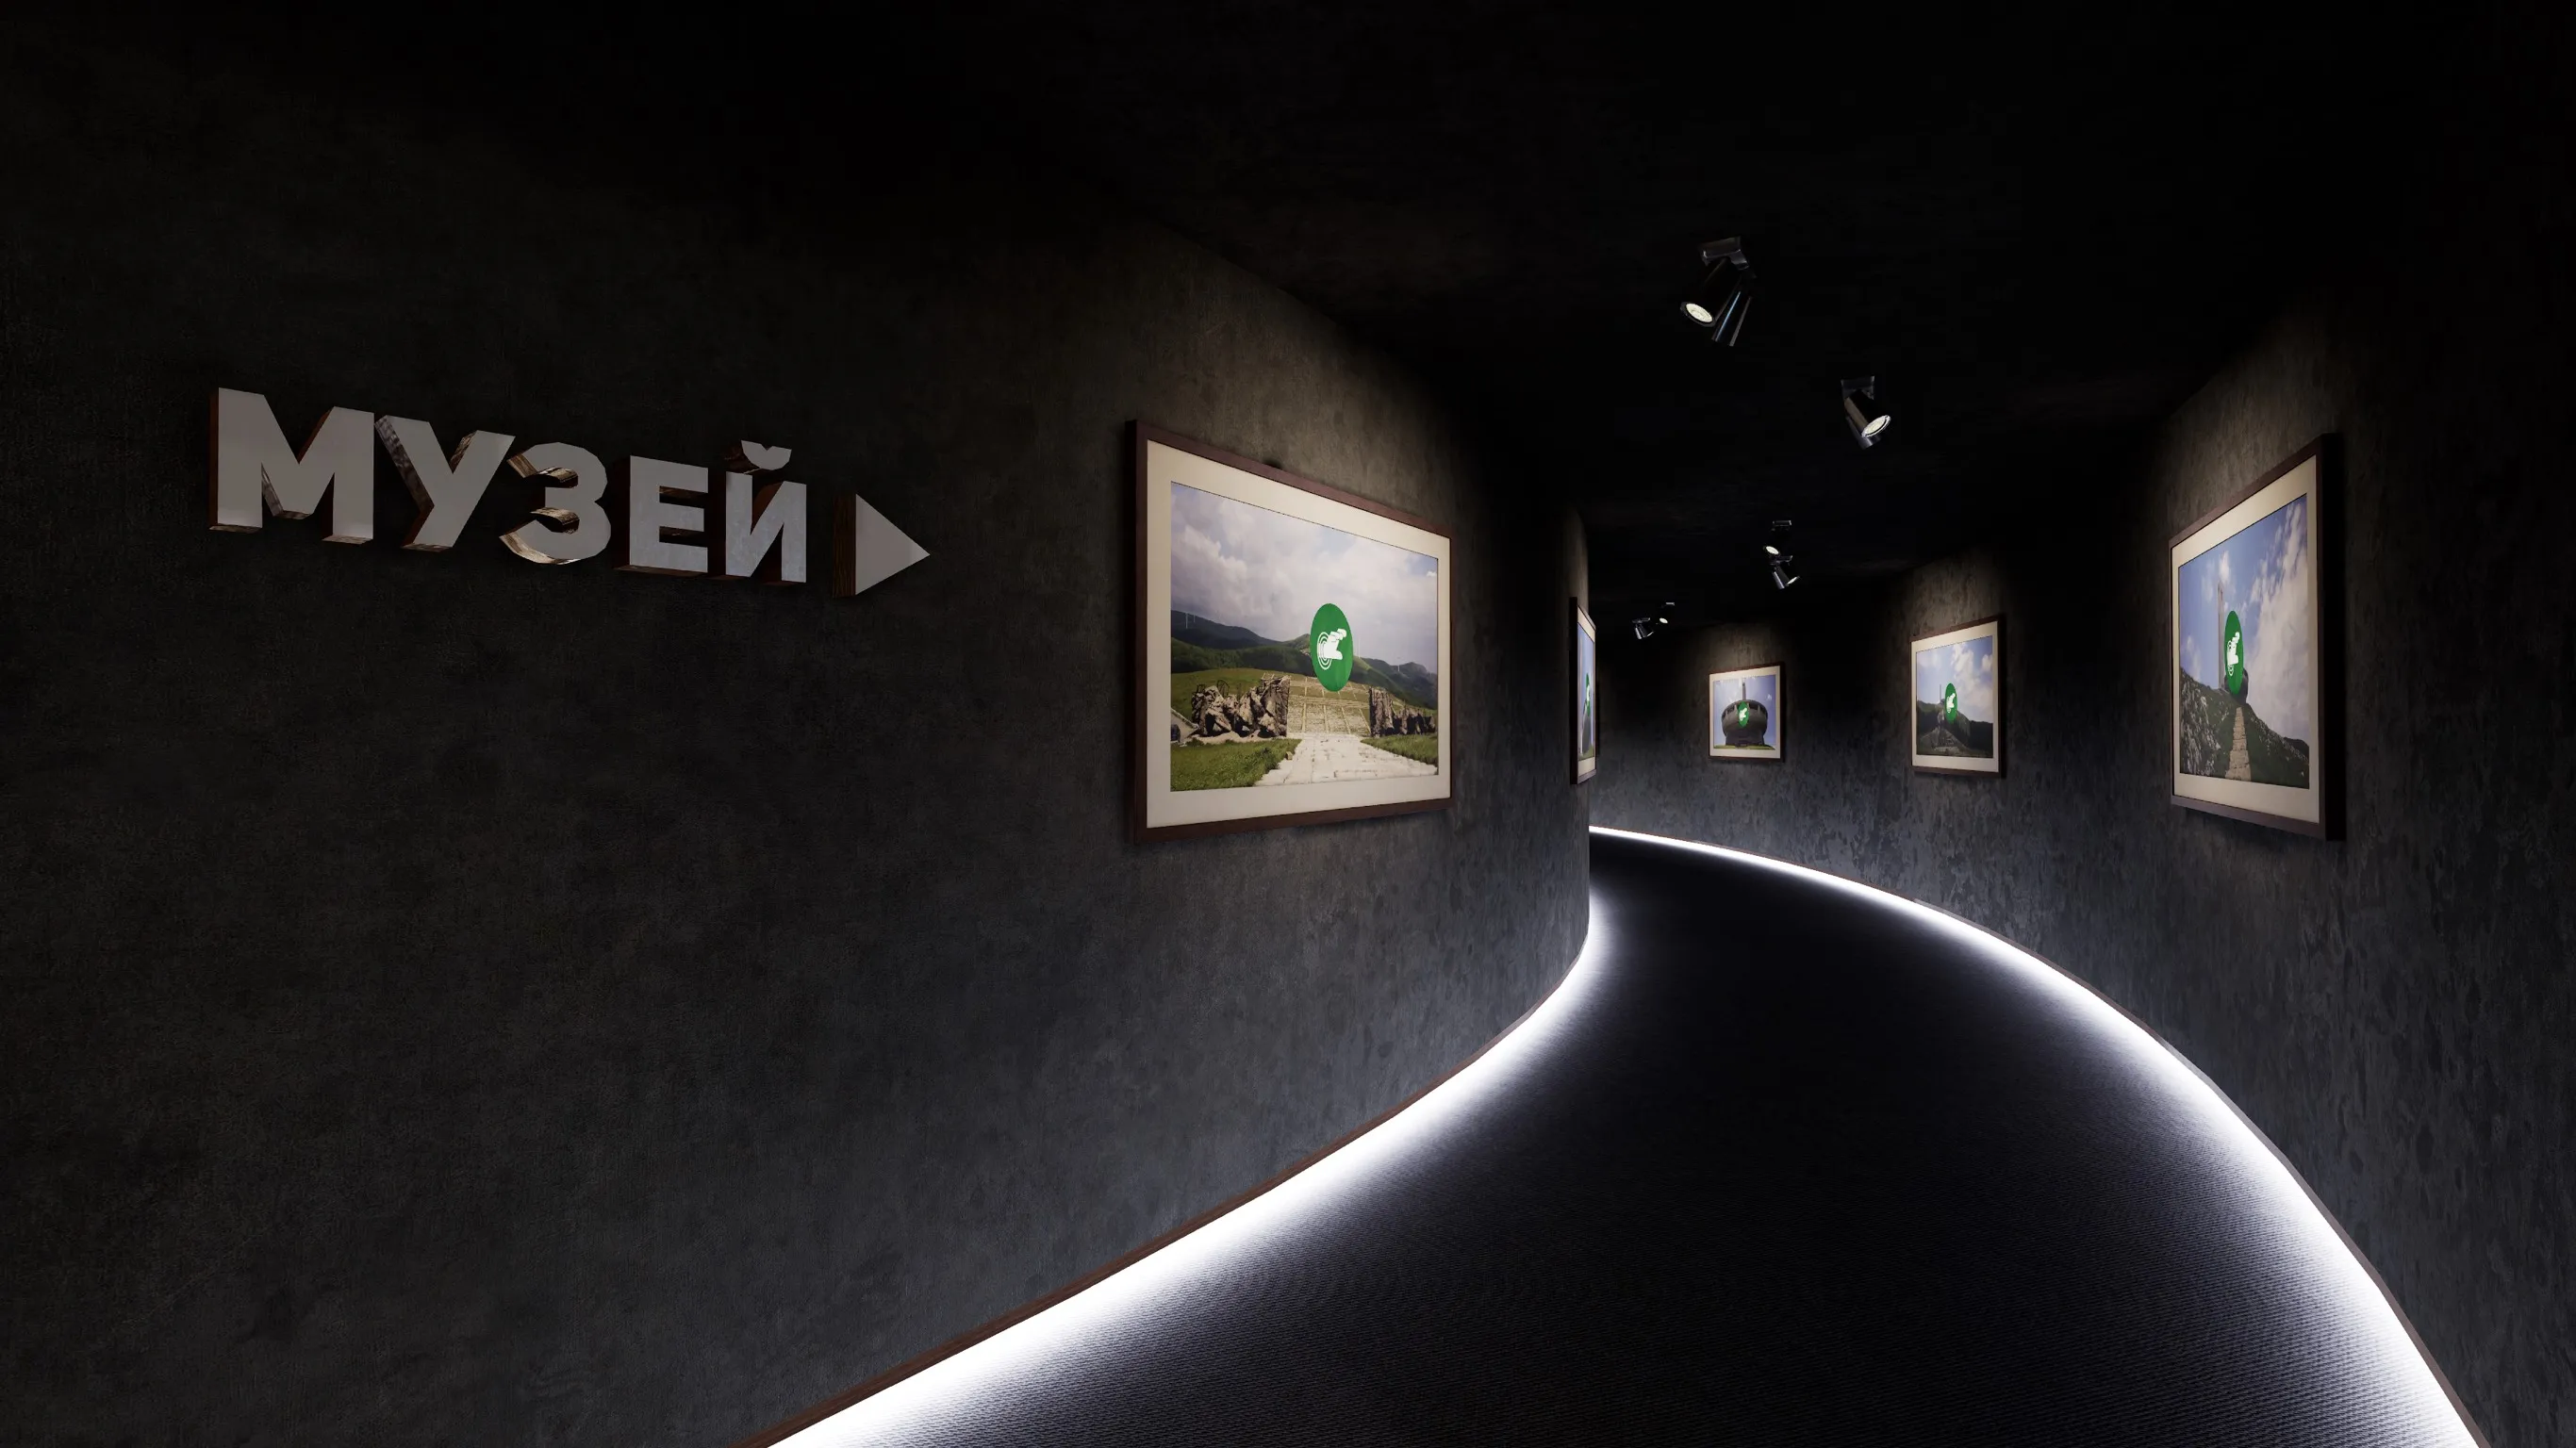 The image depicts a dark, curved corridor leading towards a museum, as indicated by the Cyrillic letters spelling MUSEUM on the wall with an arrow pointing forward. The hallway is lined with framed pictures, each illuminated by spotlights from above. The first image in the sequence prominently features a green icon of a hand, indicating interactivity, superimposed on top of a photograph of a location within the Buzludzha monument in its current state in the real world. The green icon appears to be a consistent element throughout the series of photographs, suggesting interactivity throughout the museum. The floor has a reflective, metallic finish that mirrors the curvature of the ceiling, enhancing the depth and perspective of the corridor. The overall ambiance is modern and minimalistic, with a focus on the artwork displayed.